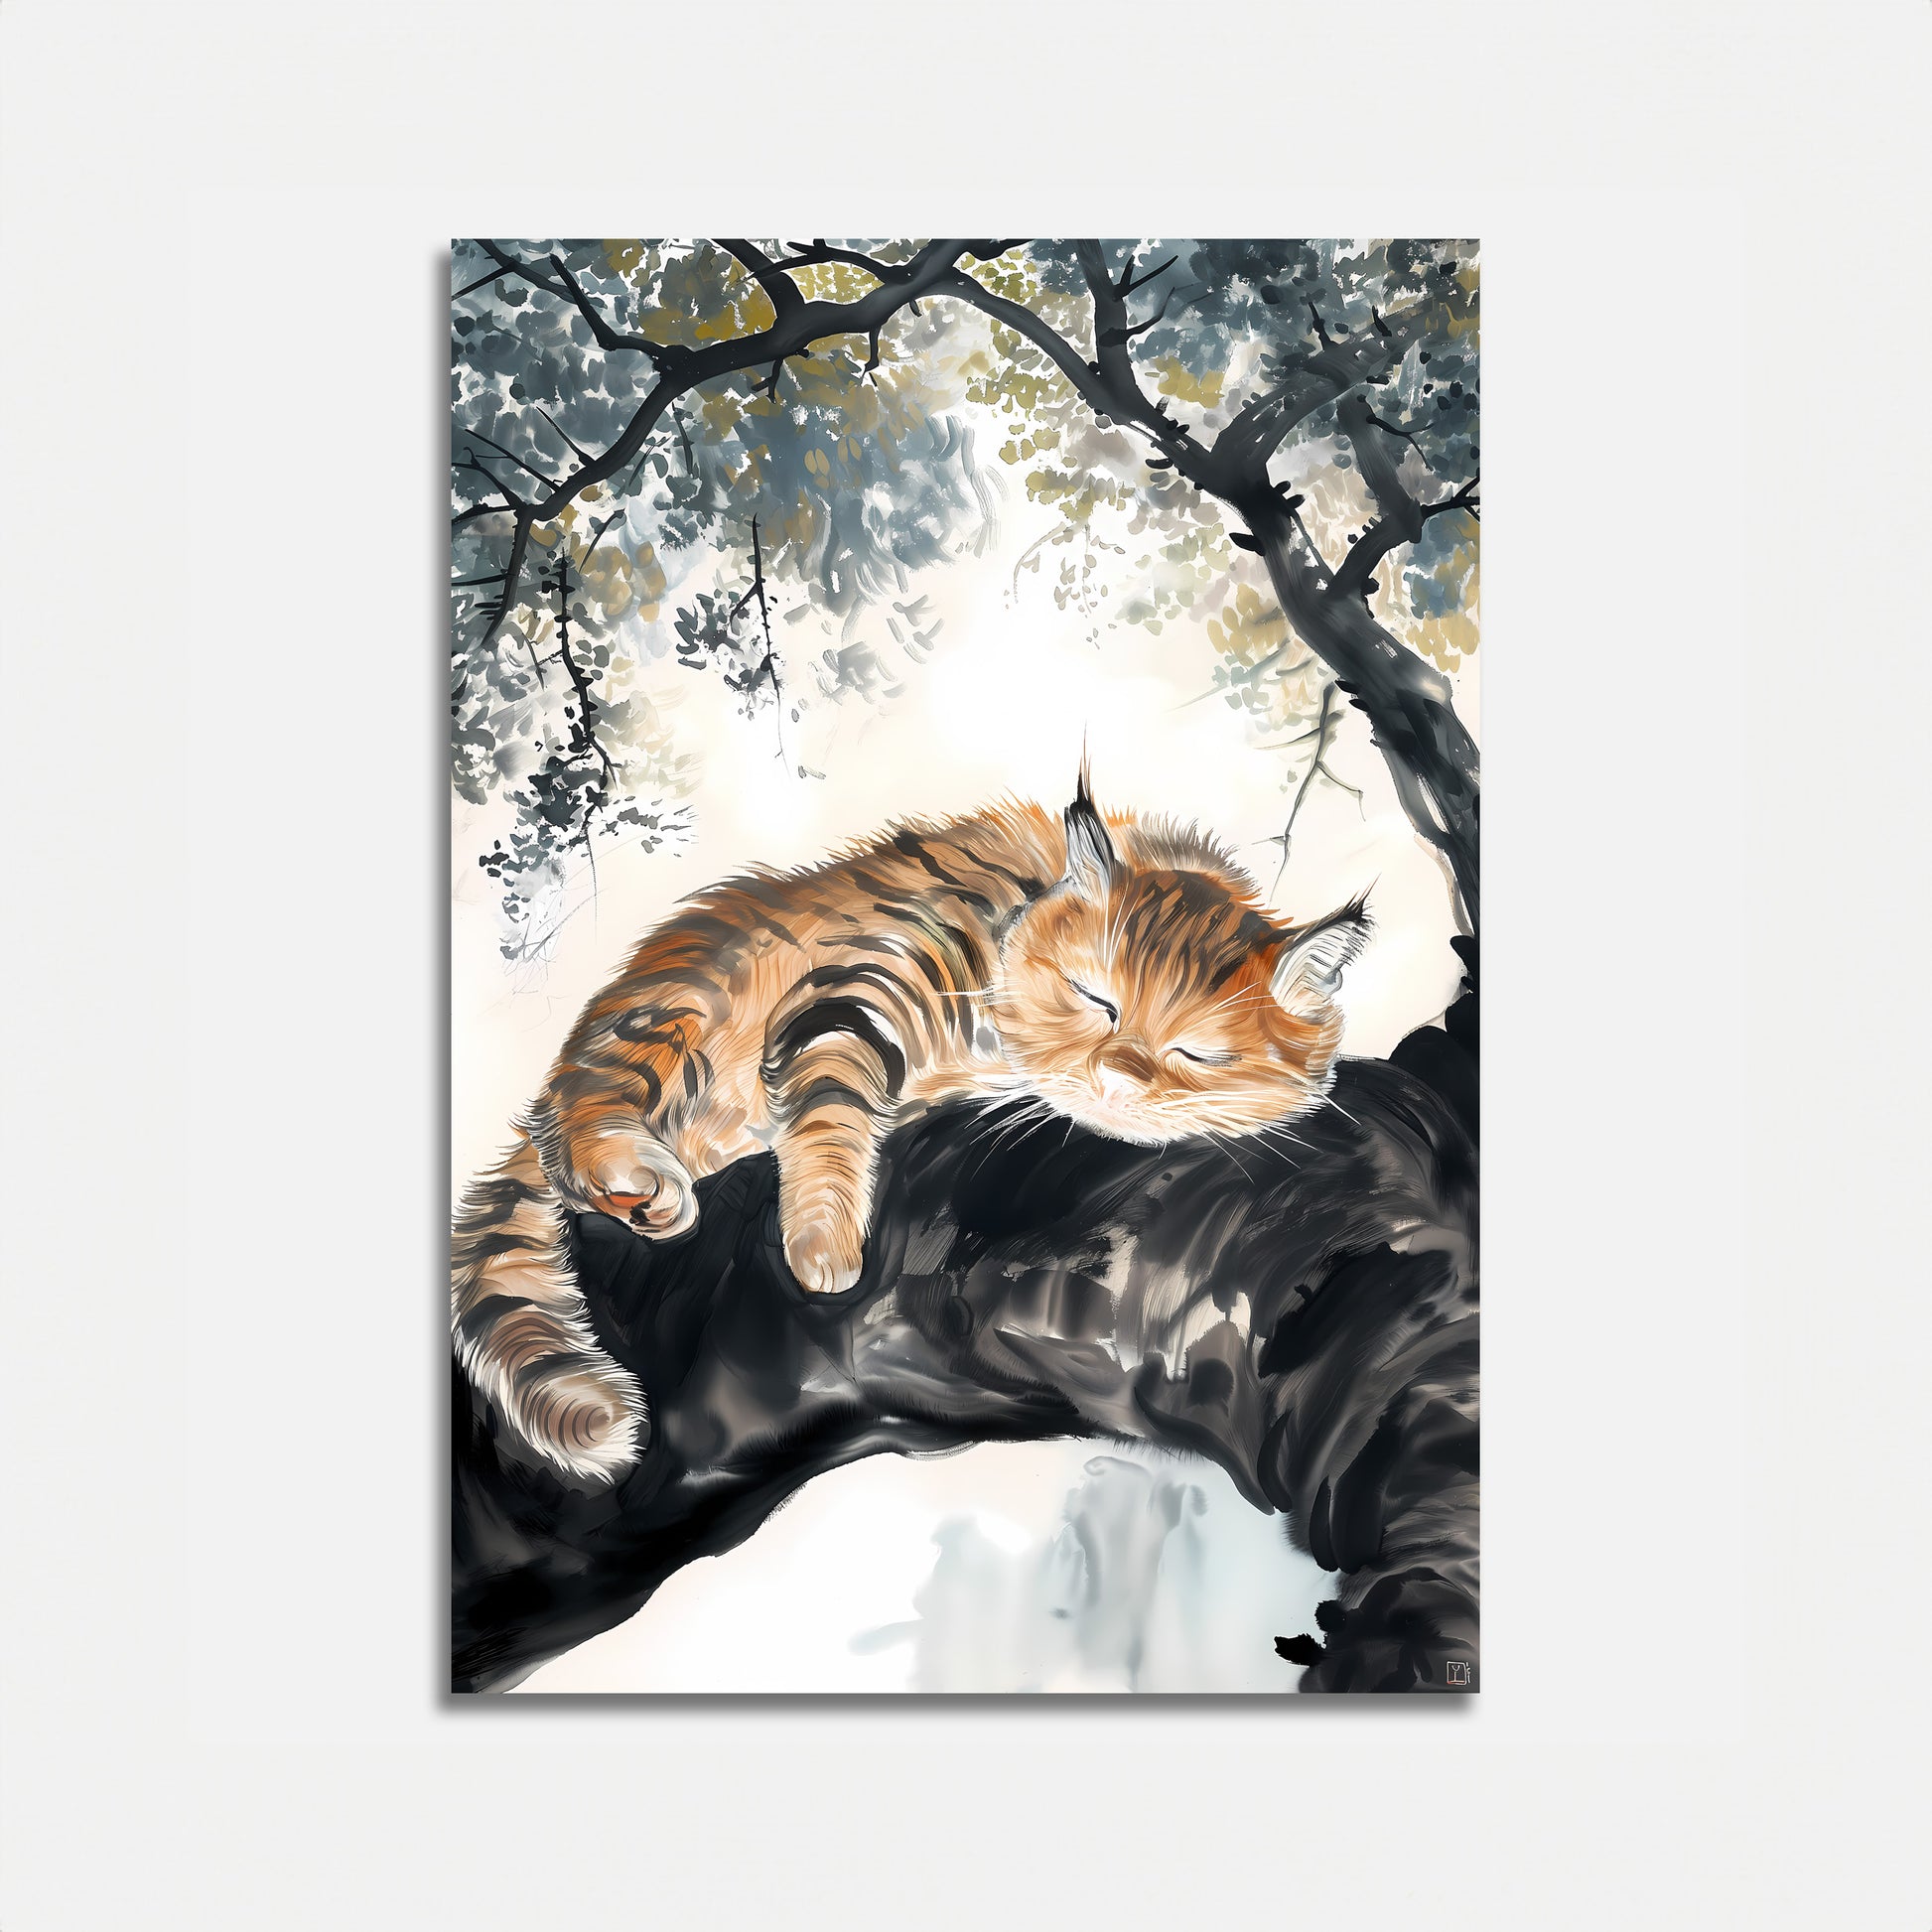 A painting of a ginger cat sleeping peacefully on a tree branch.